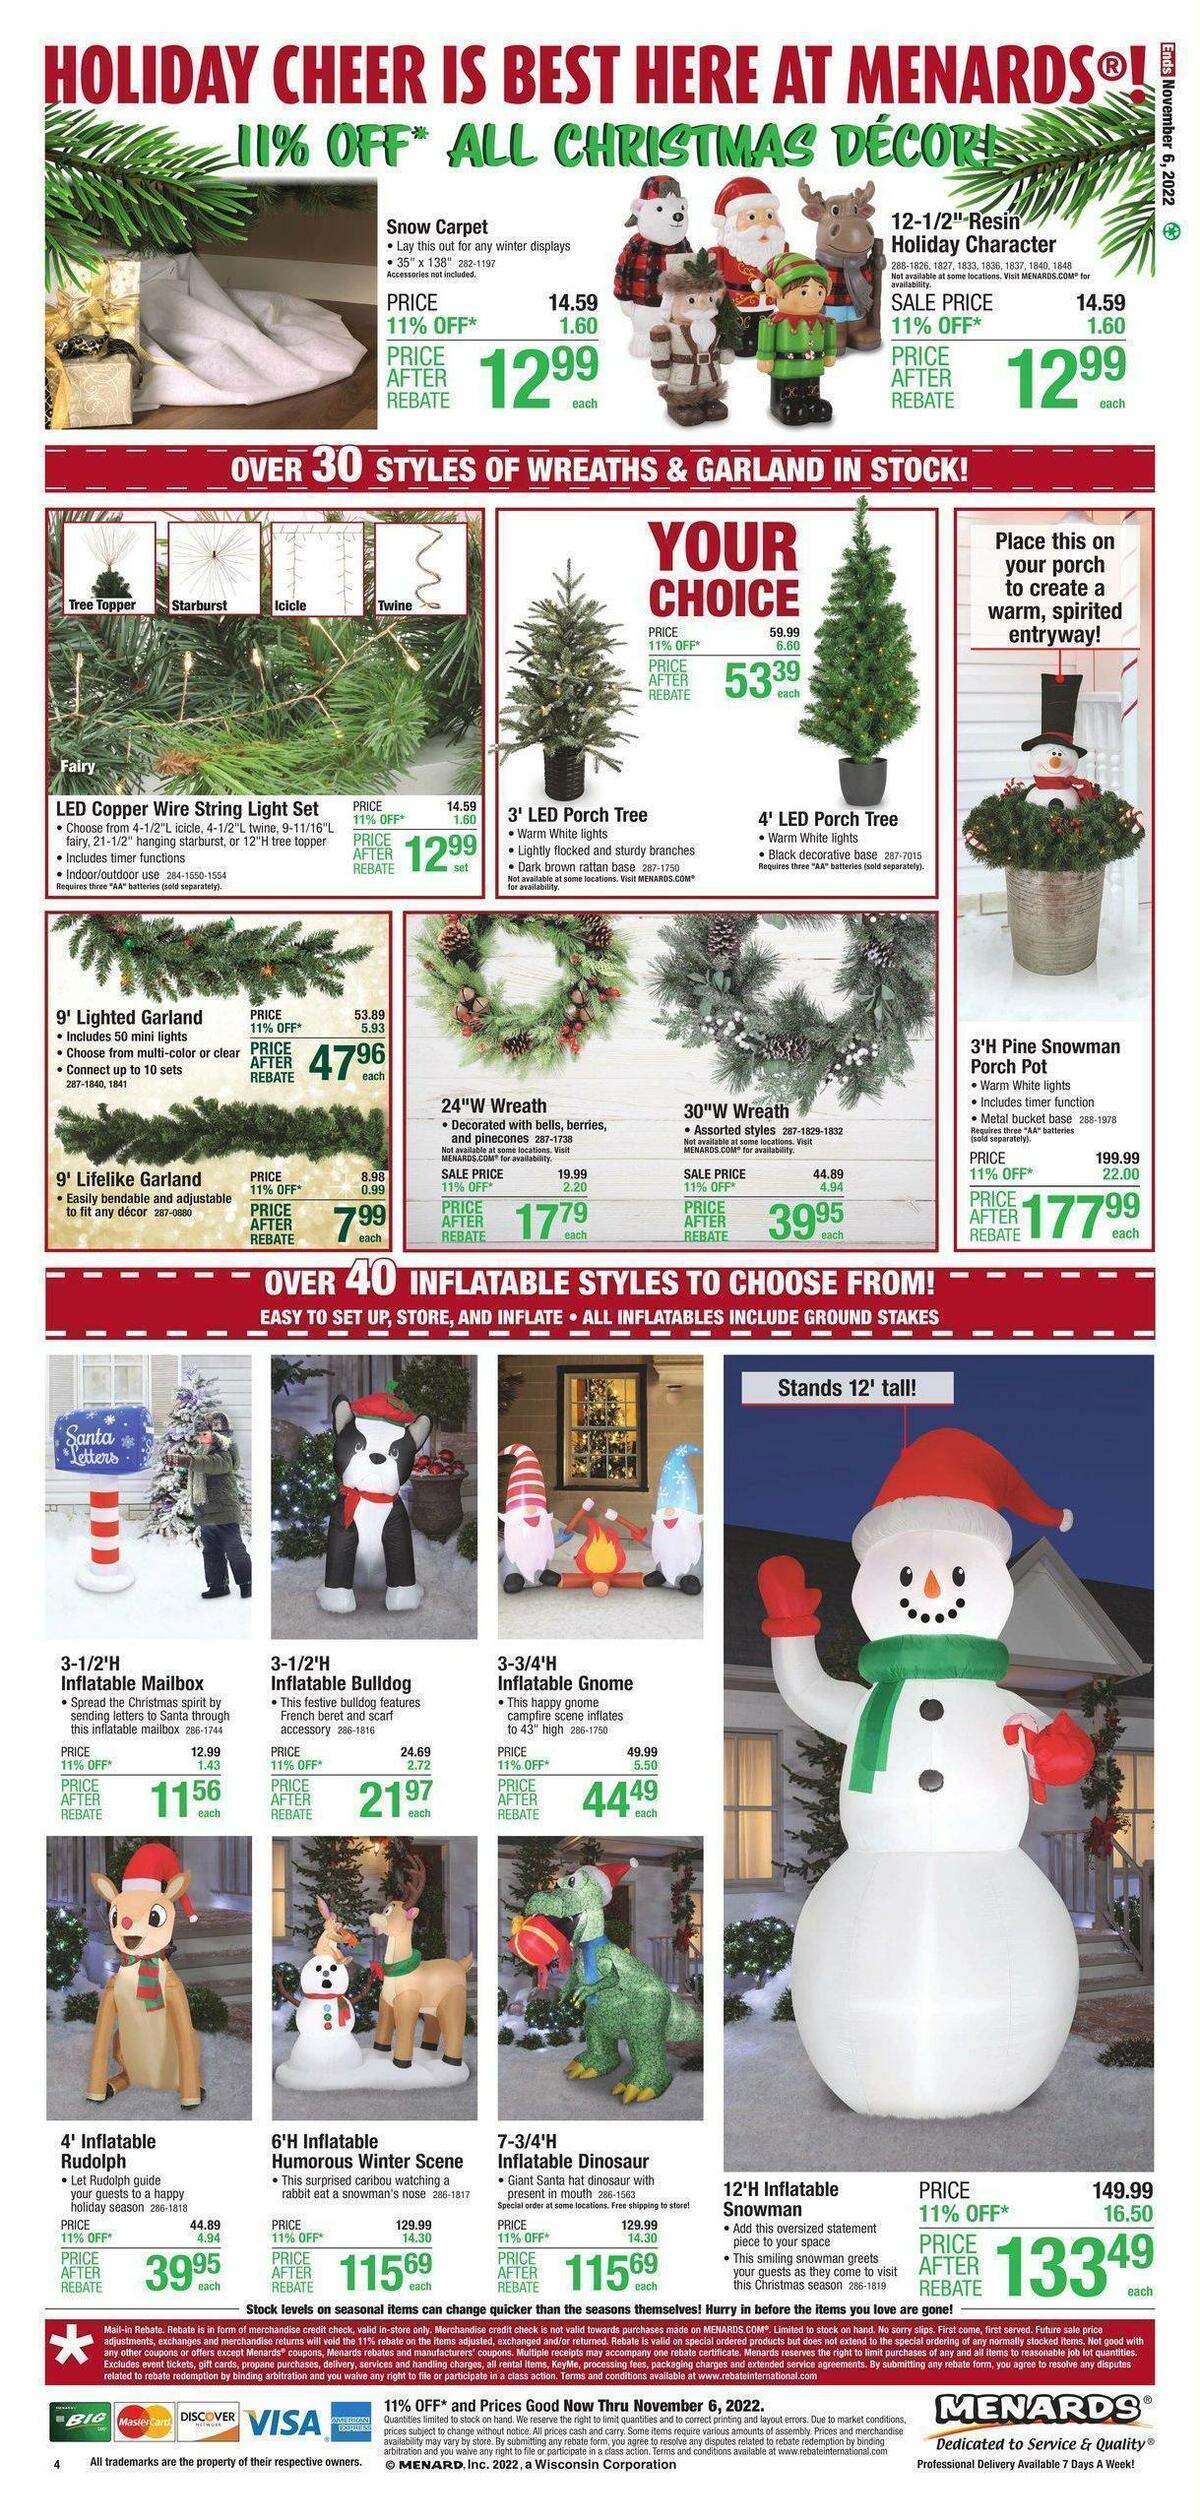 Menards Christmas Decor Weekly Ad from October 26